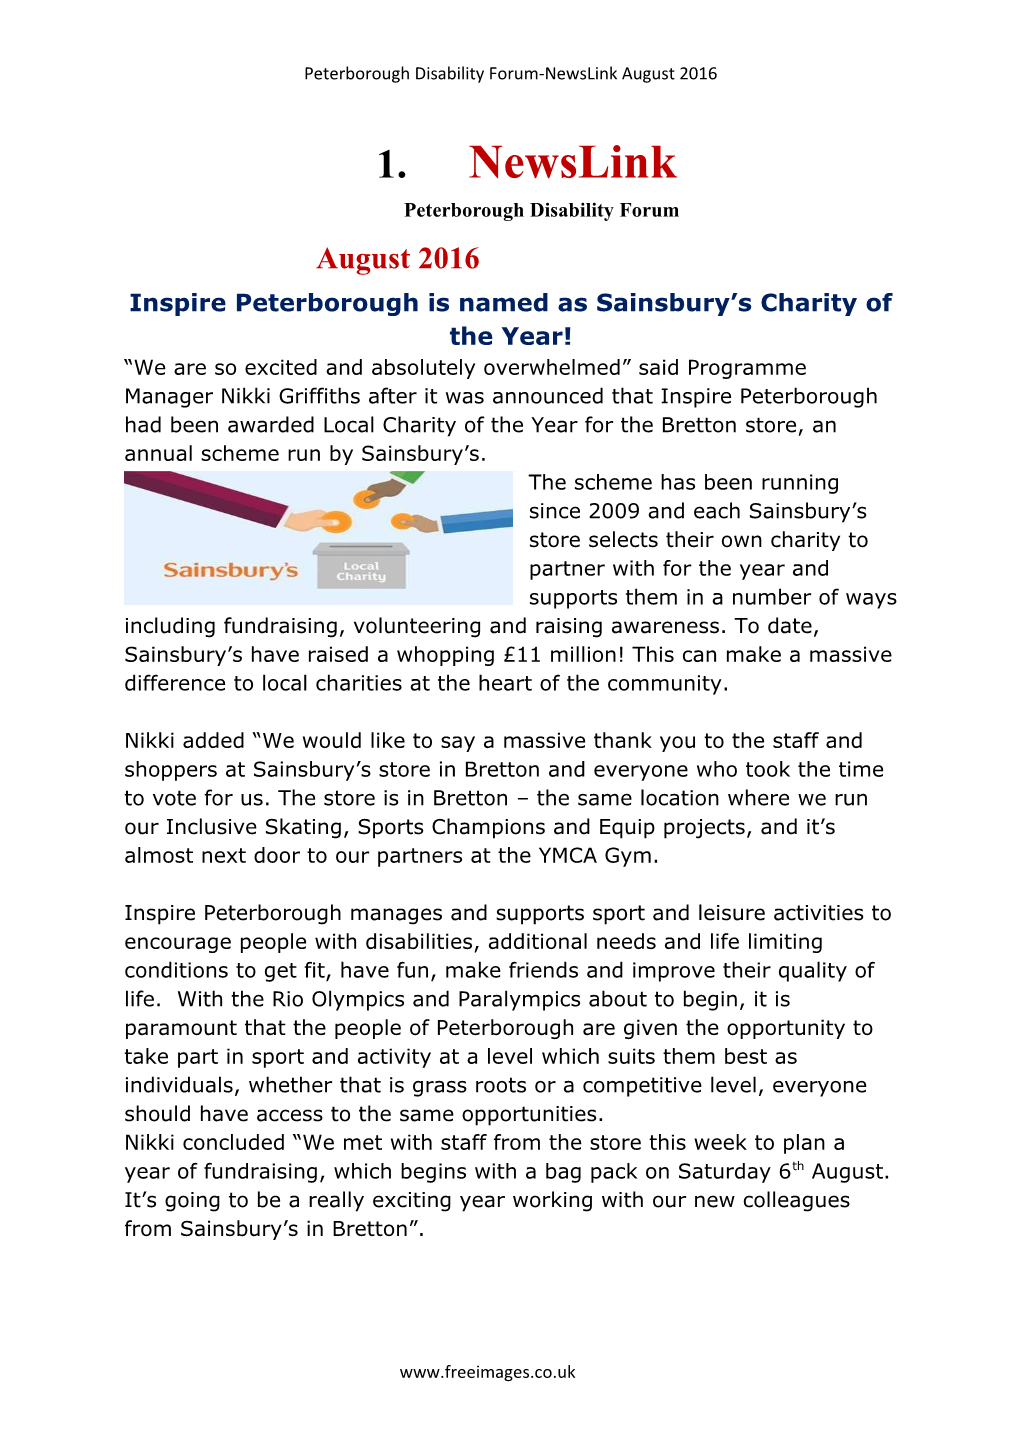 Inspire Peterborough Is Named As Sainsbury S Charity of the Year!